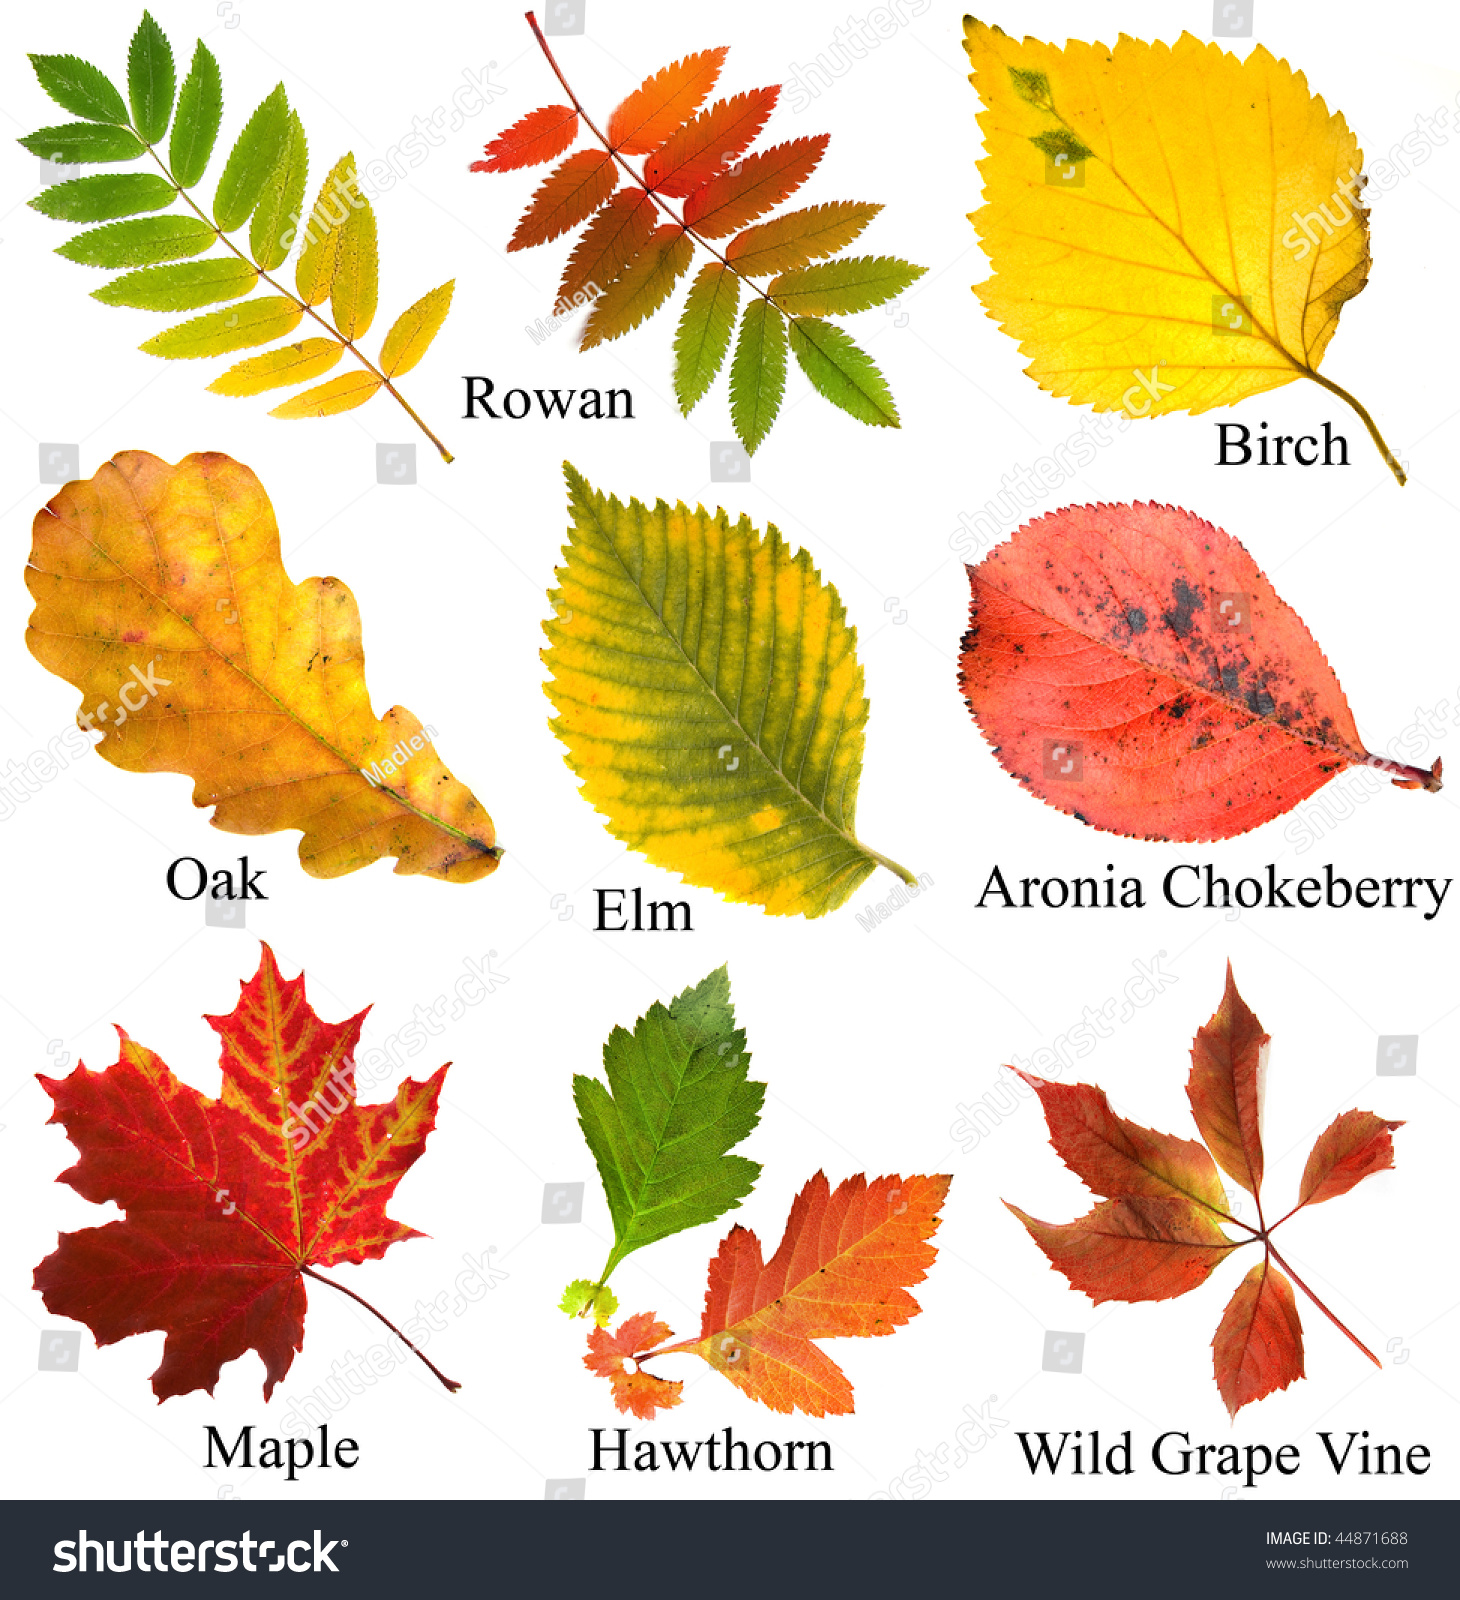 What Is The Real Color Of Leaves